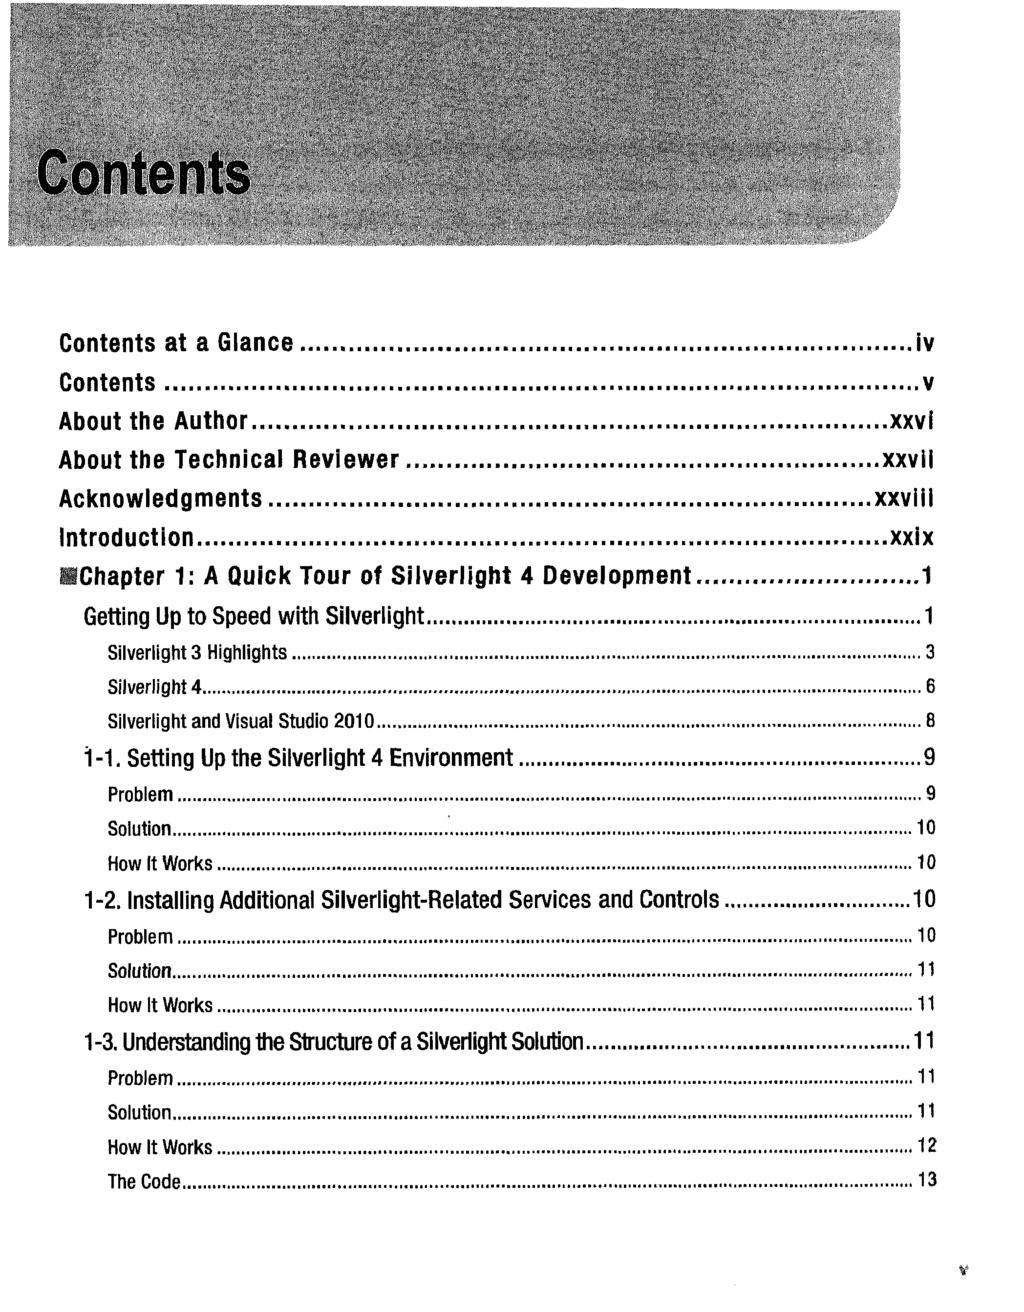 Contents at a Glance Contents About the Author About the Technical Reviewer Acknowledgments Introduction iv v xxvi xxvli xxviil xxix Chapter 1: A Quick Tour of Silverlight 4 Development 1 Getting Up